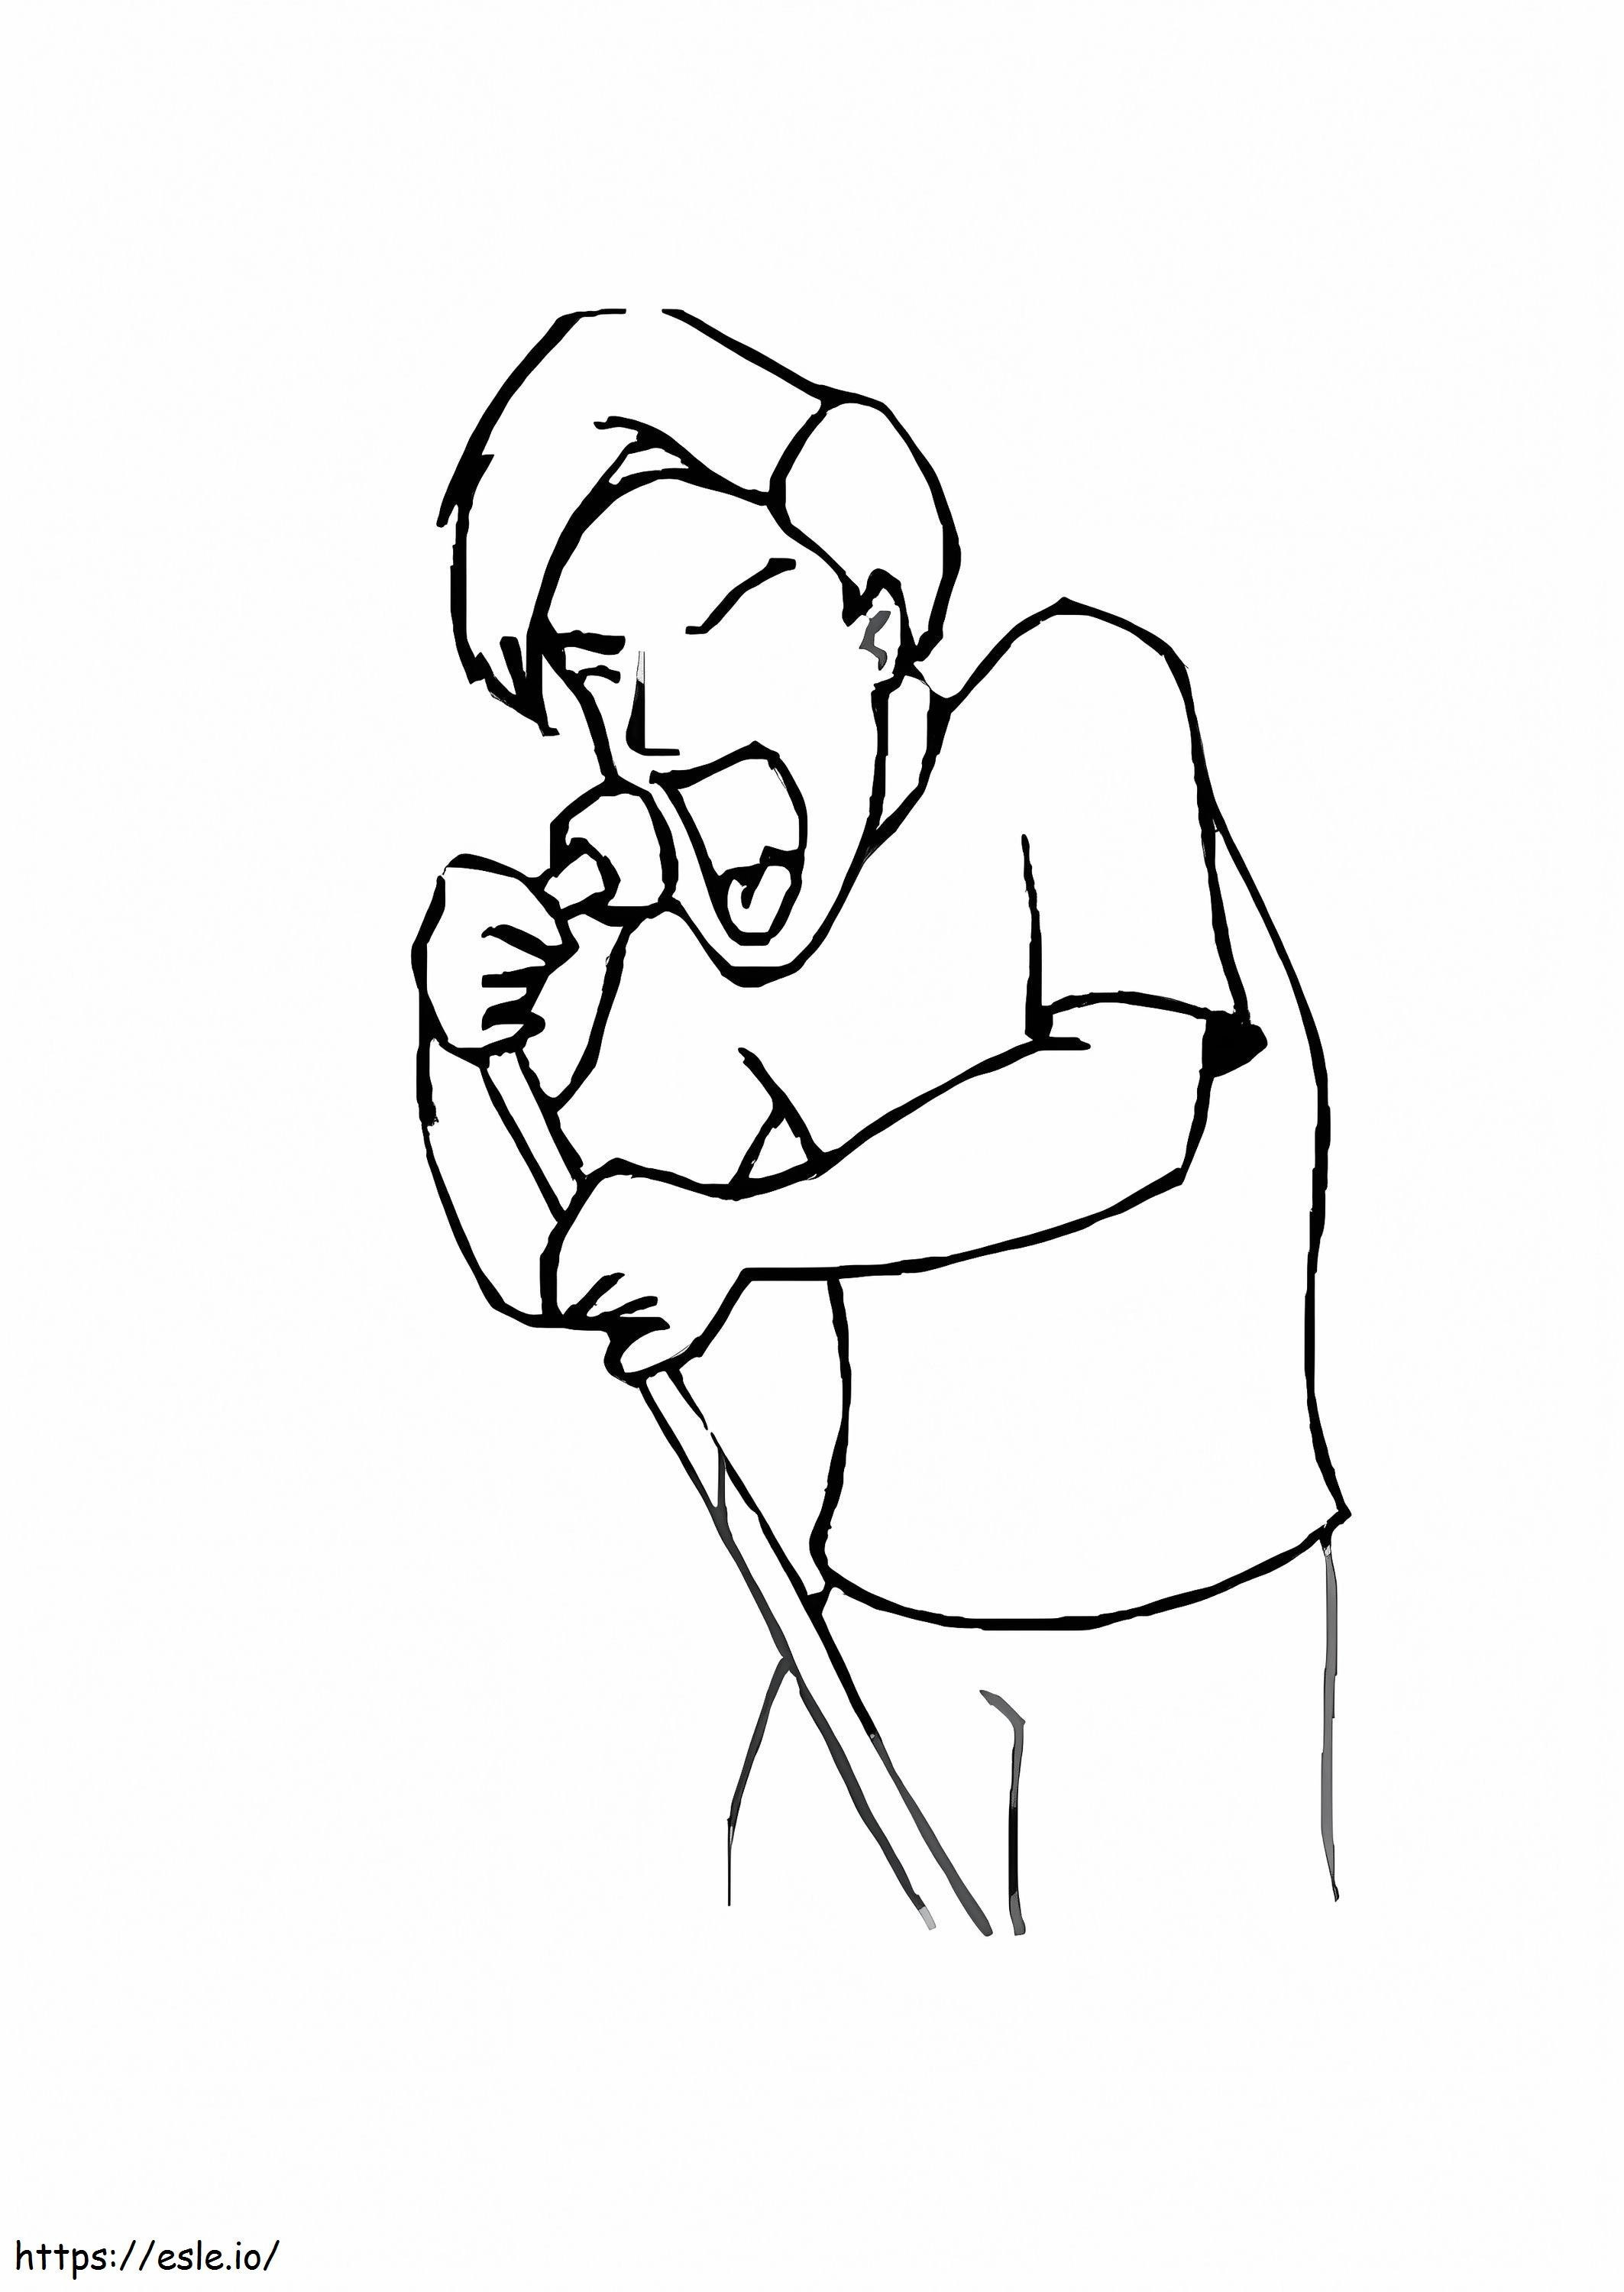 A Singer coloring page